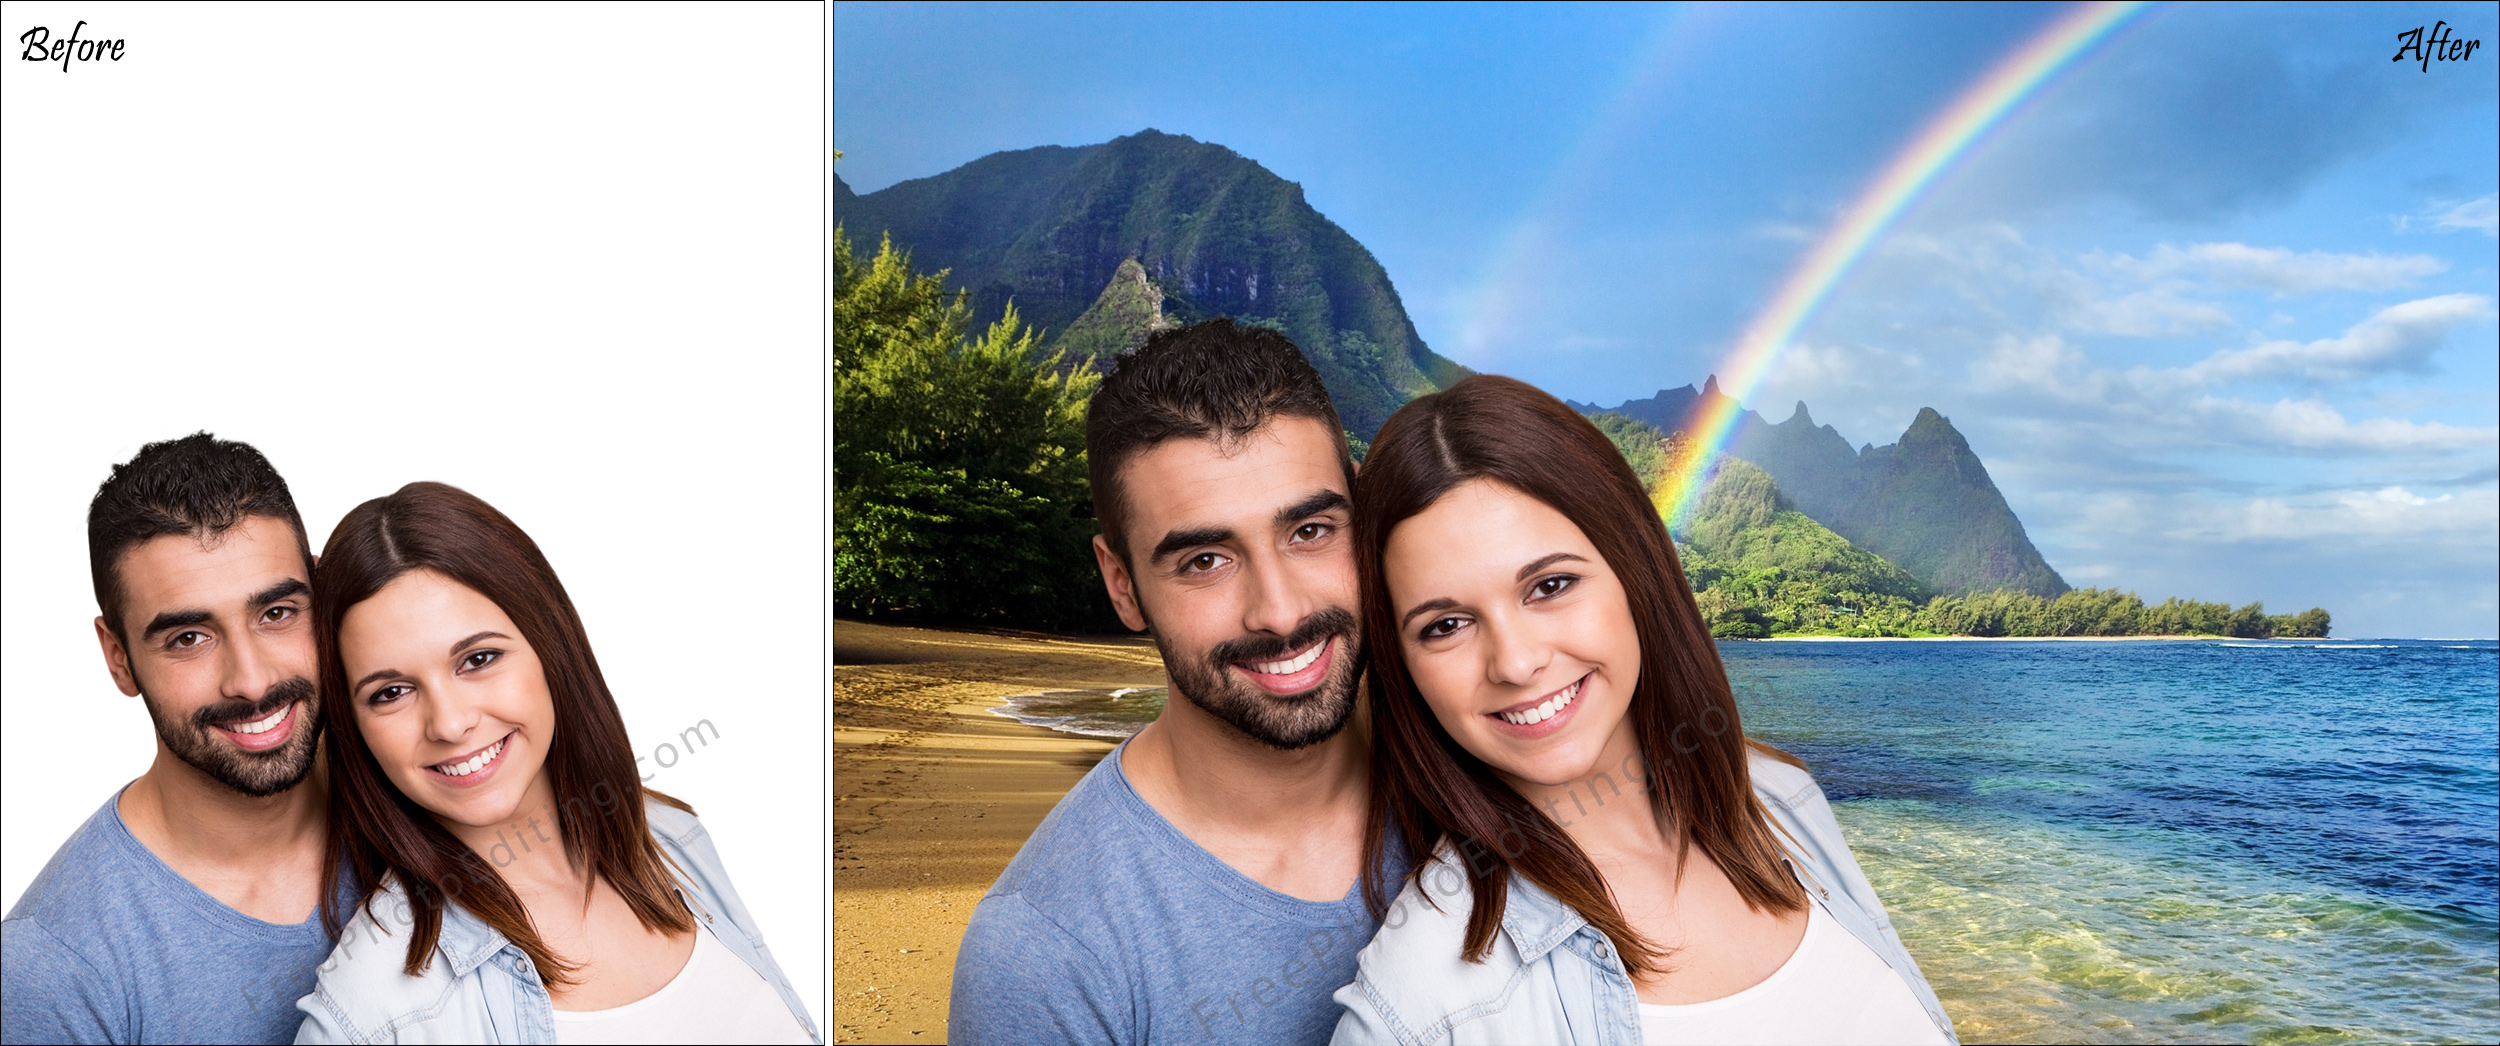 Customised Valentine day photo effects with image editing